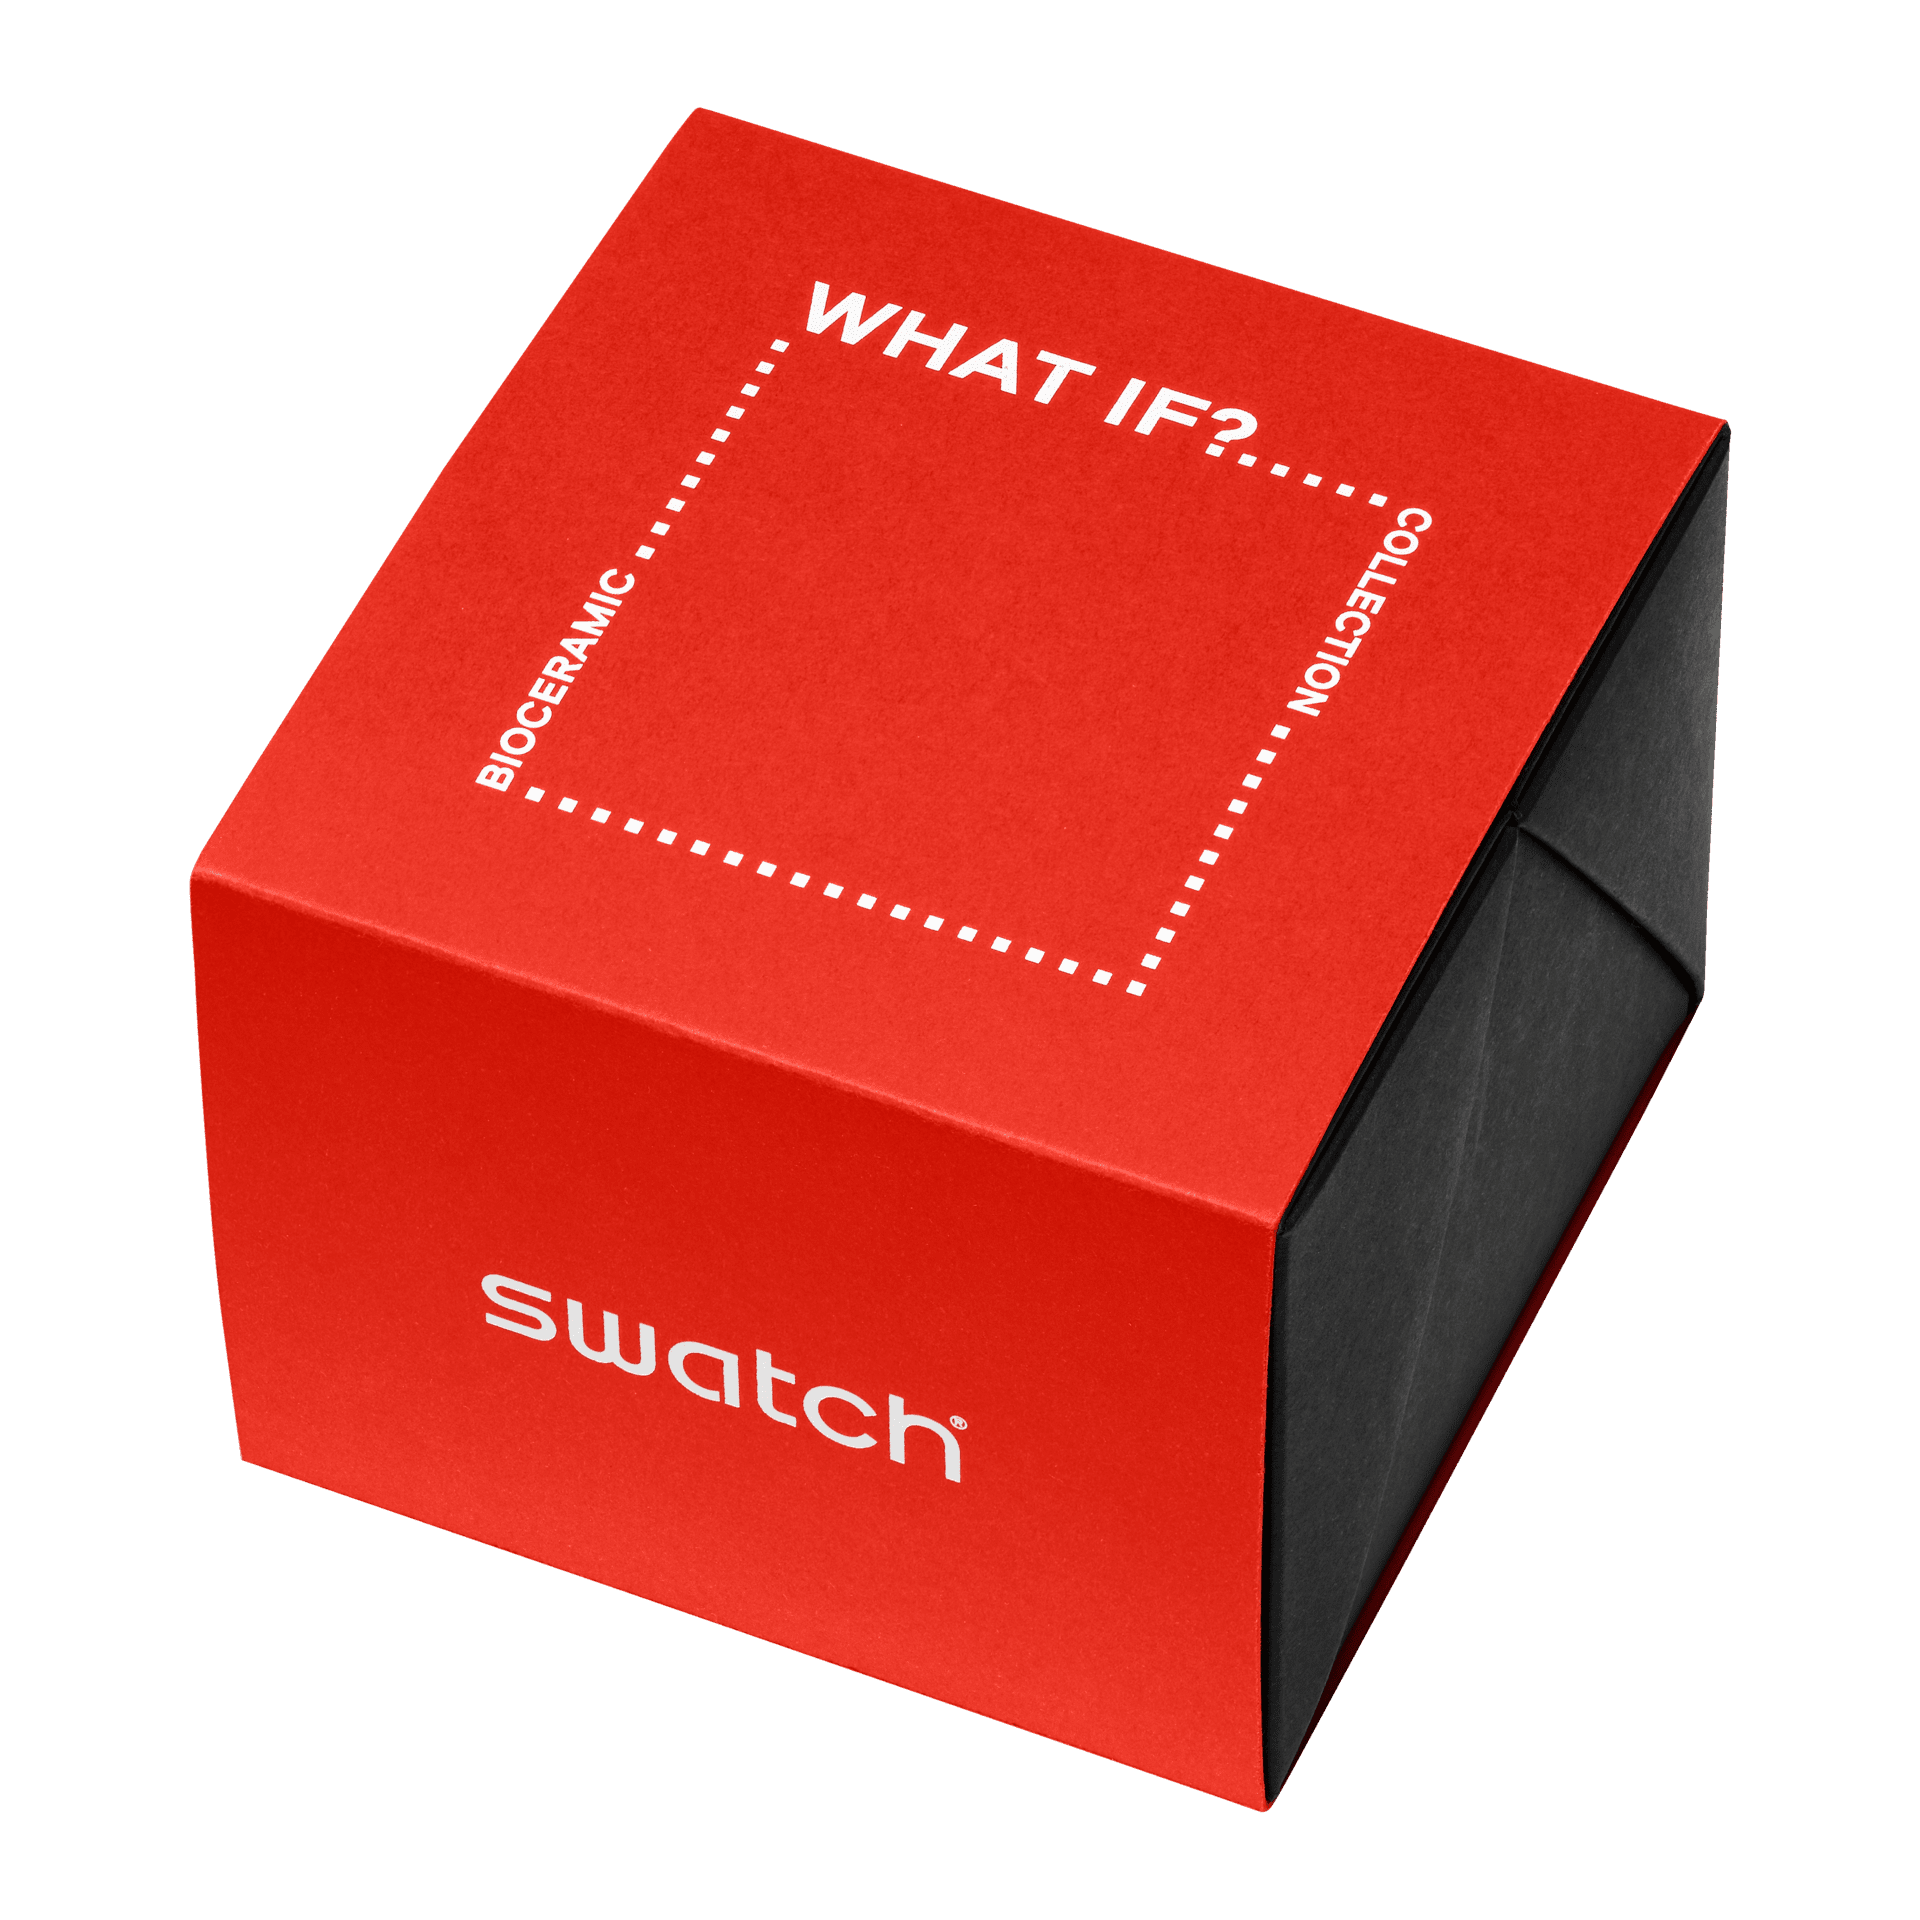 SO34M700 - WHAT IF…GRAY? - Swatch® Official Store